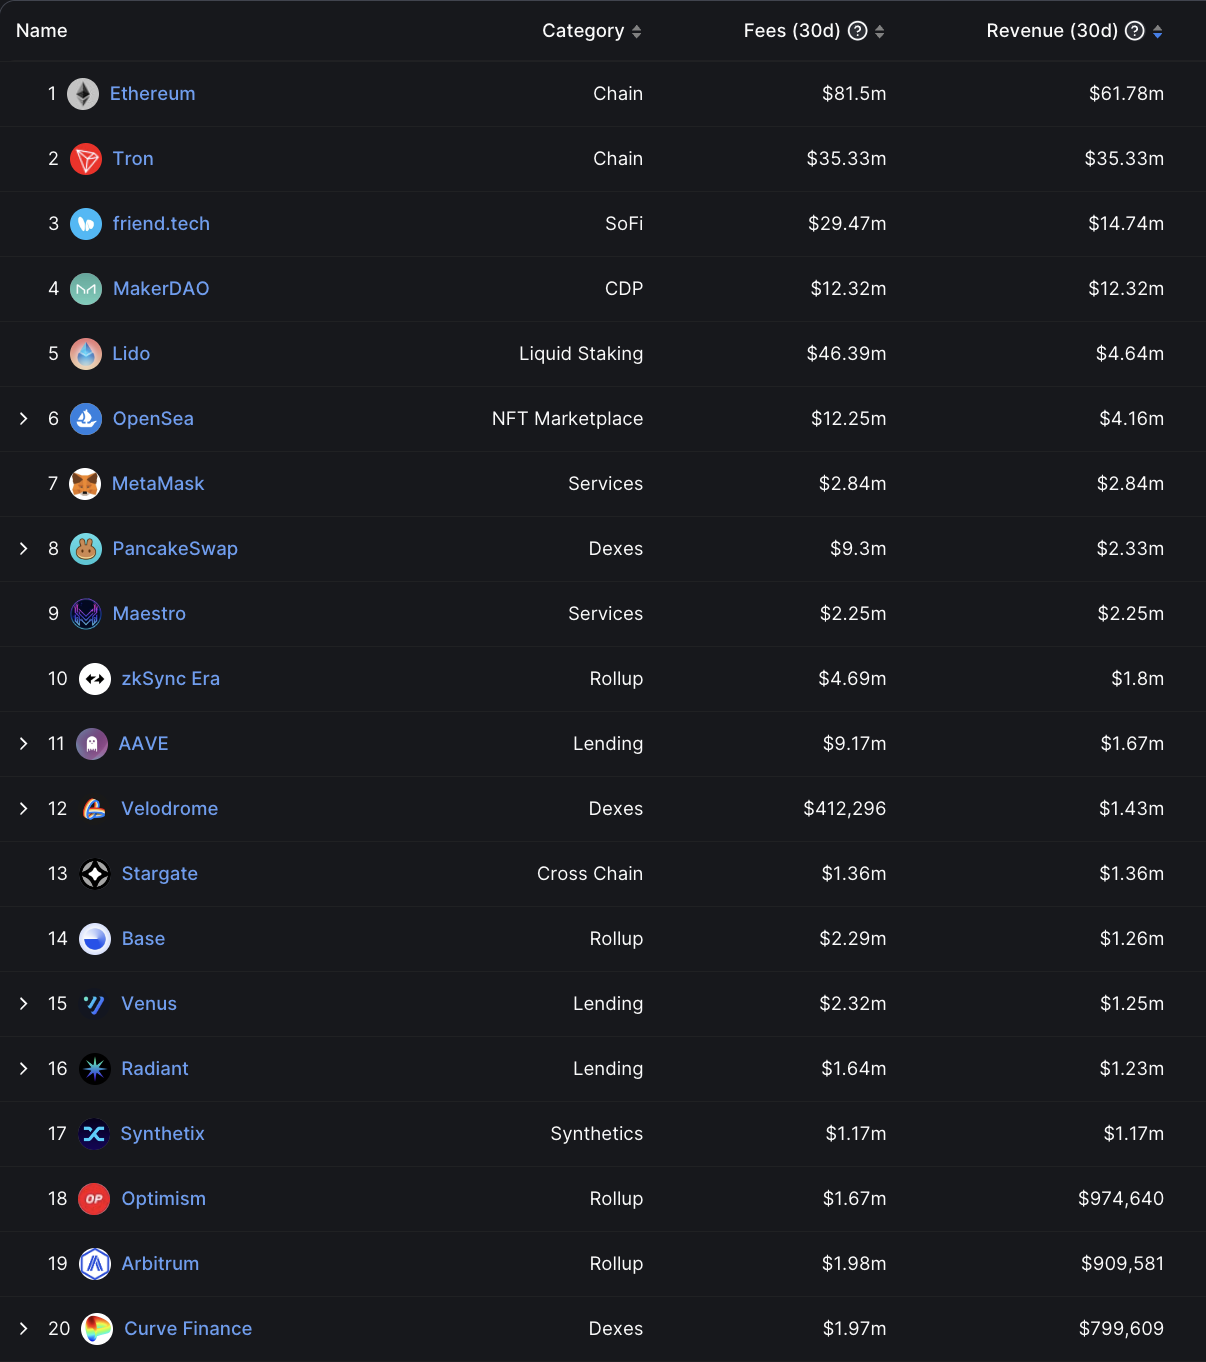 Top 20 protocols and apps by 30D revenue. Source: DefiLlama